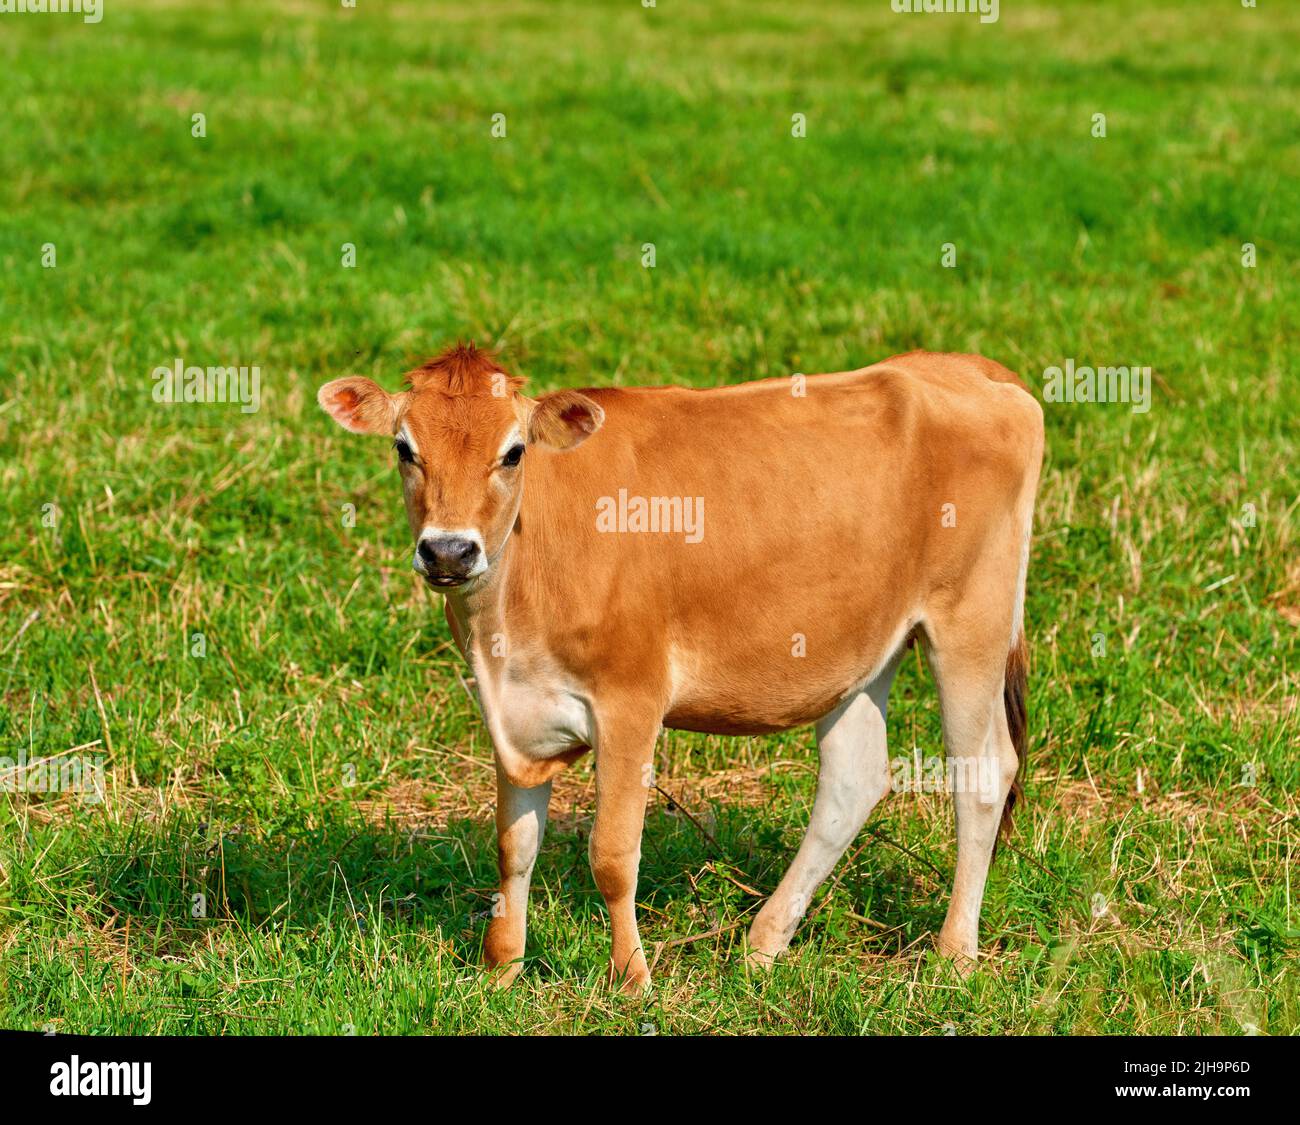 Portrait of a brown cow grazing on green farmland in the countryside. Cattle or livestock standing on an open, empty and secluded grassy field or Stock Photo